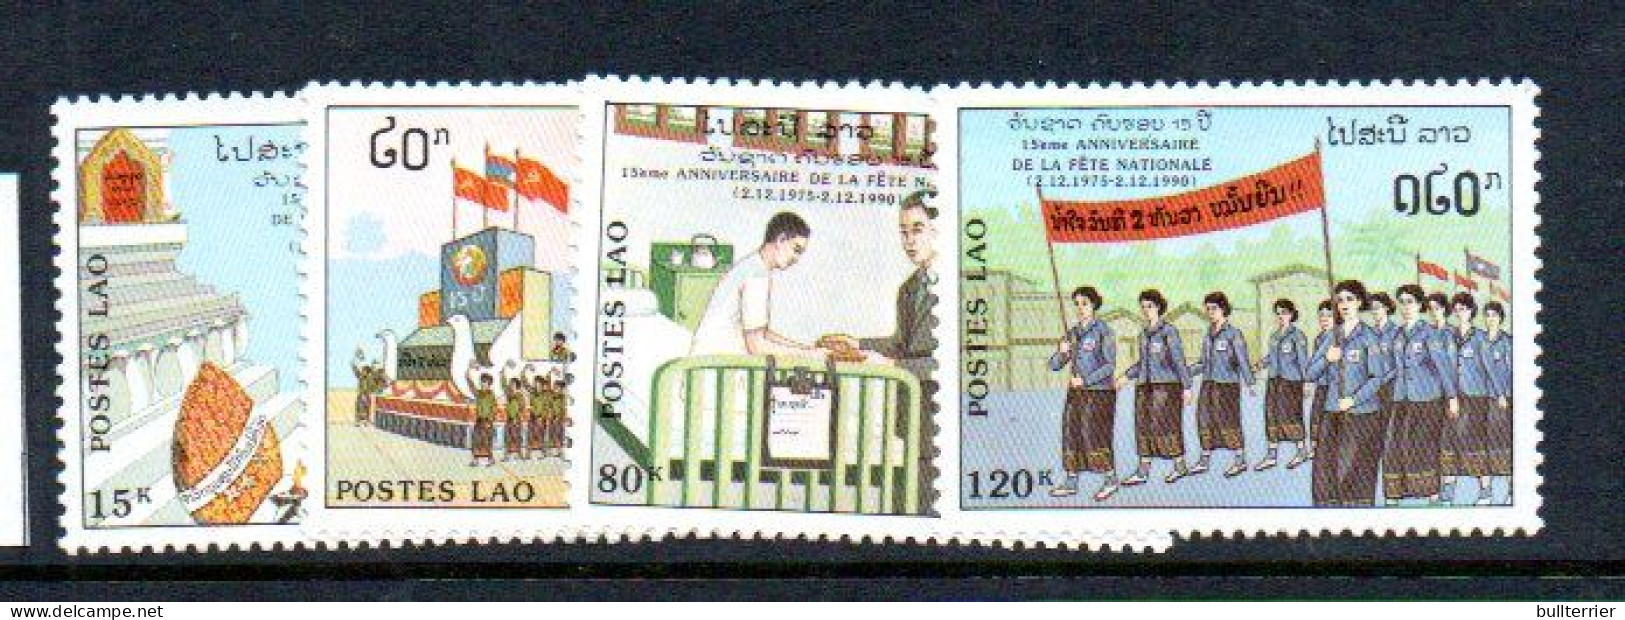 LAOS - 1990 - NATIONAL DAY  SET OF 4   MINT NEVER HINGED - Laos